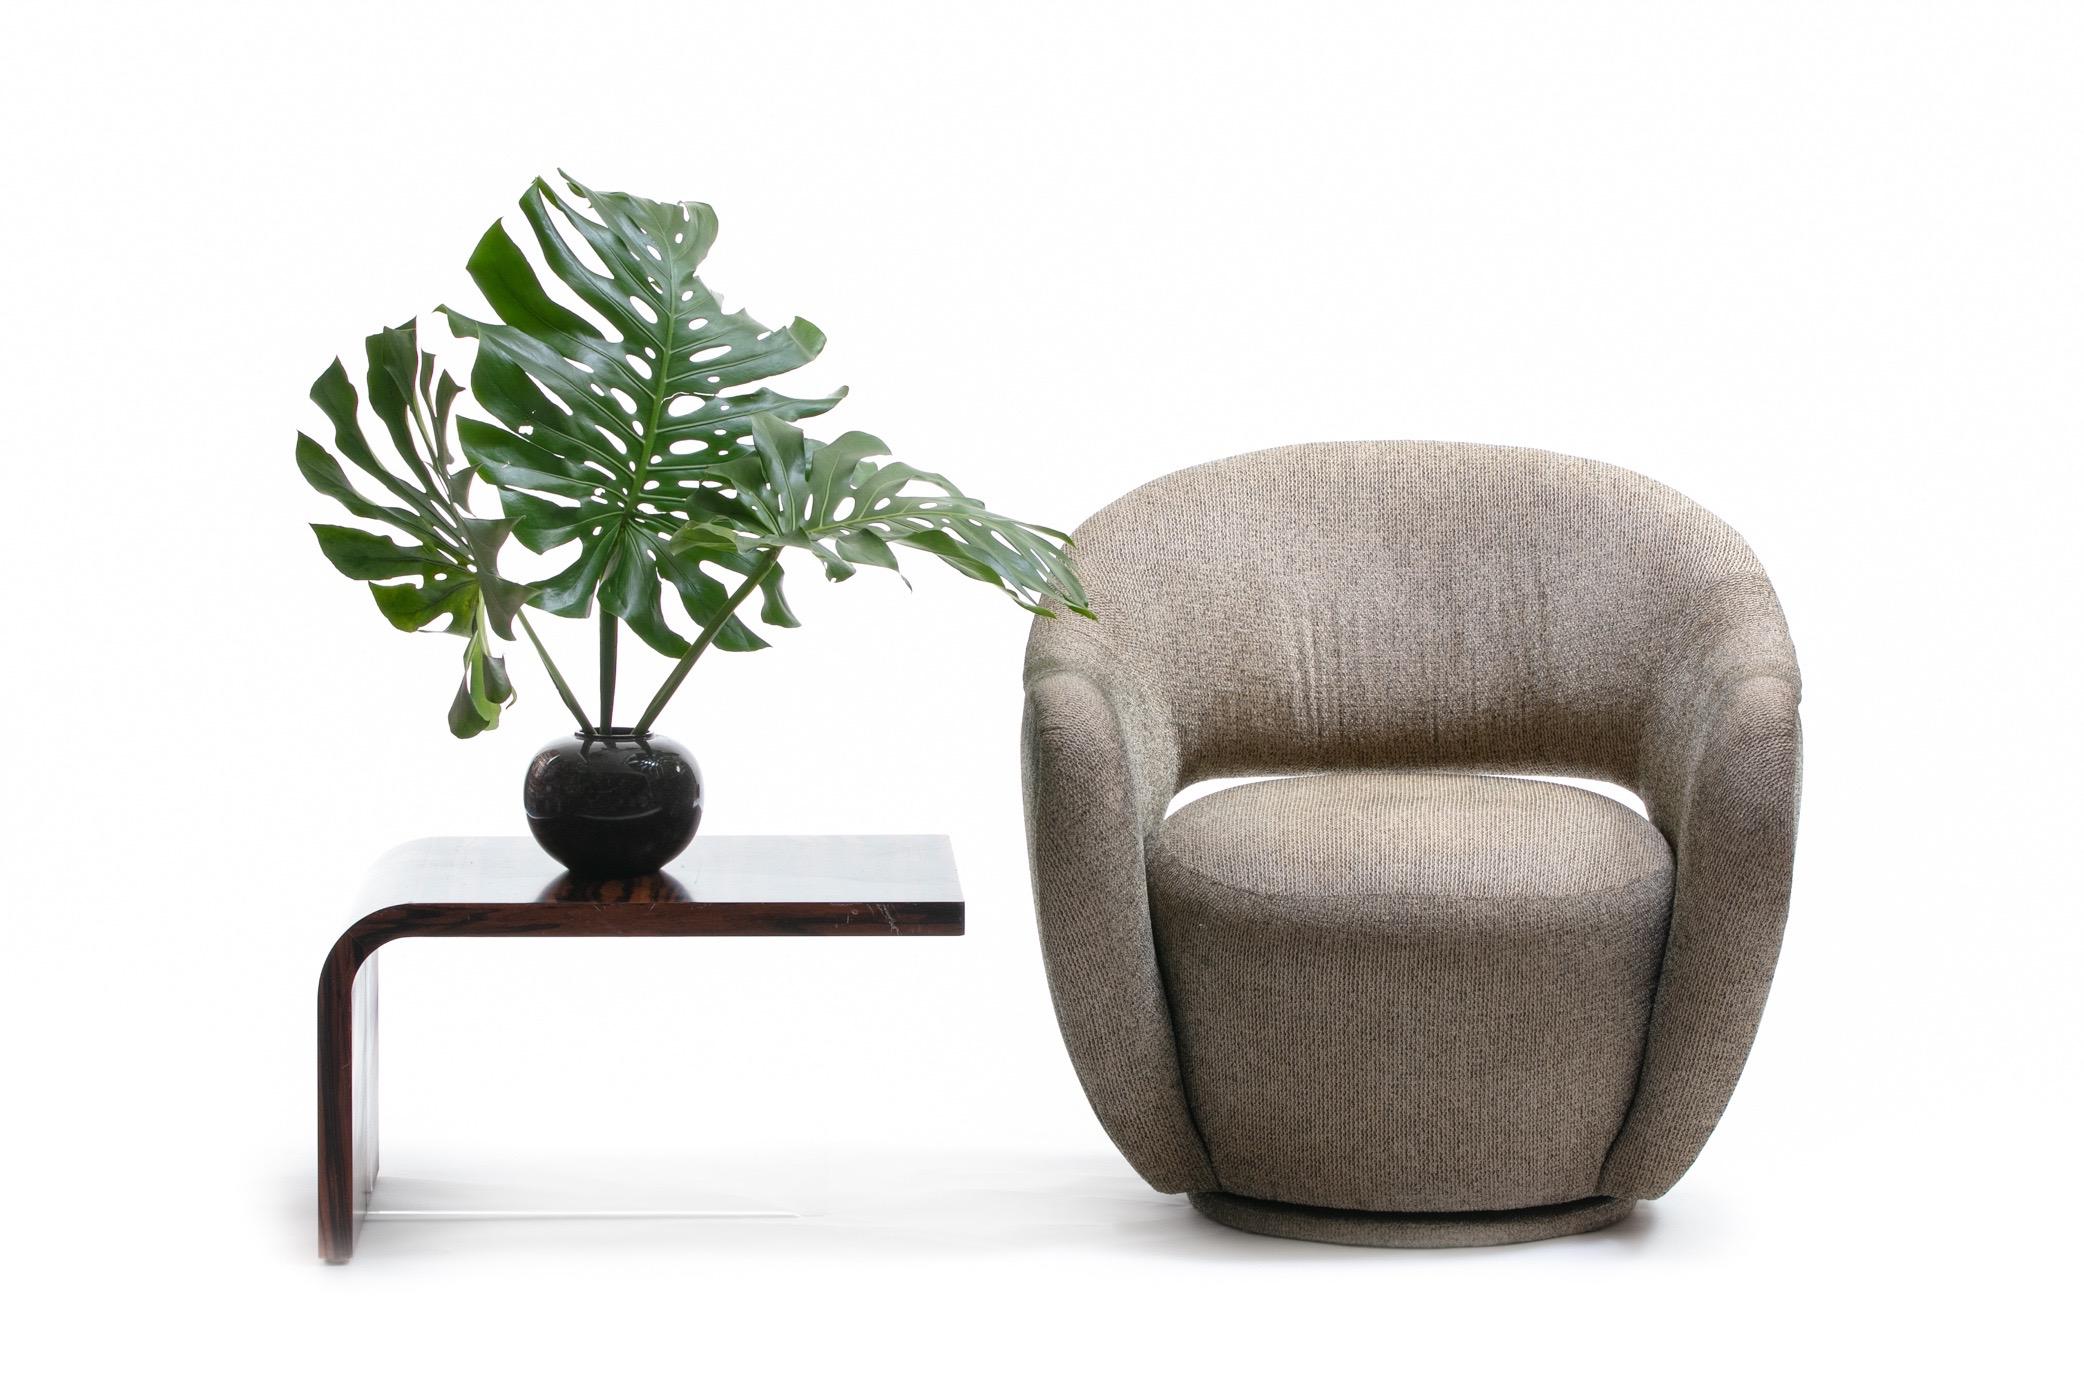 Organic sculptural Vladimir Kagan WYSIWYG (What You See Is What You Get) swivel chair for Directional. A generously scaled swivel chair that feels like a modern throne chair, it's actually more comfortable than you would ever surmise by simply